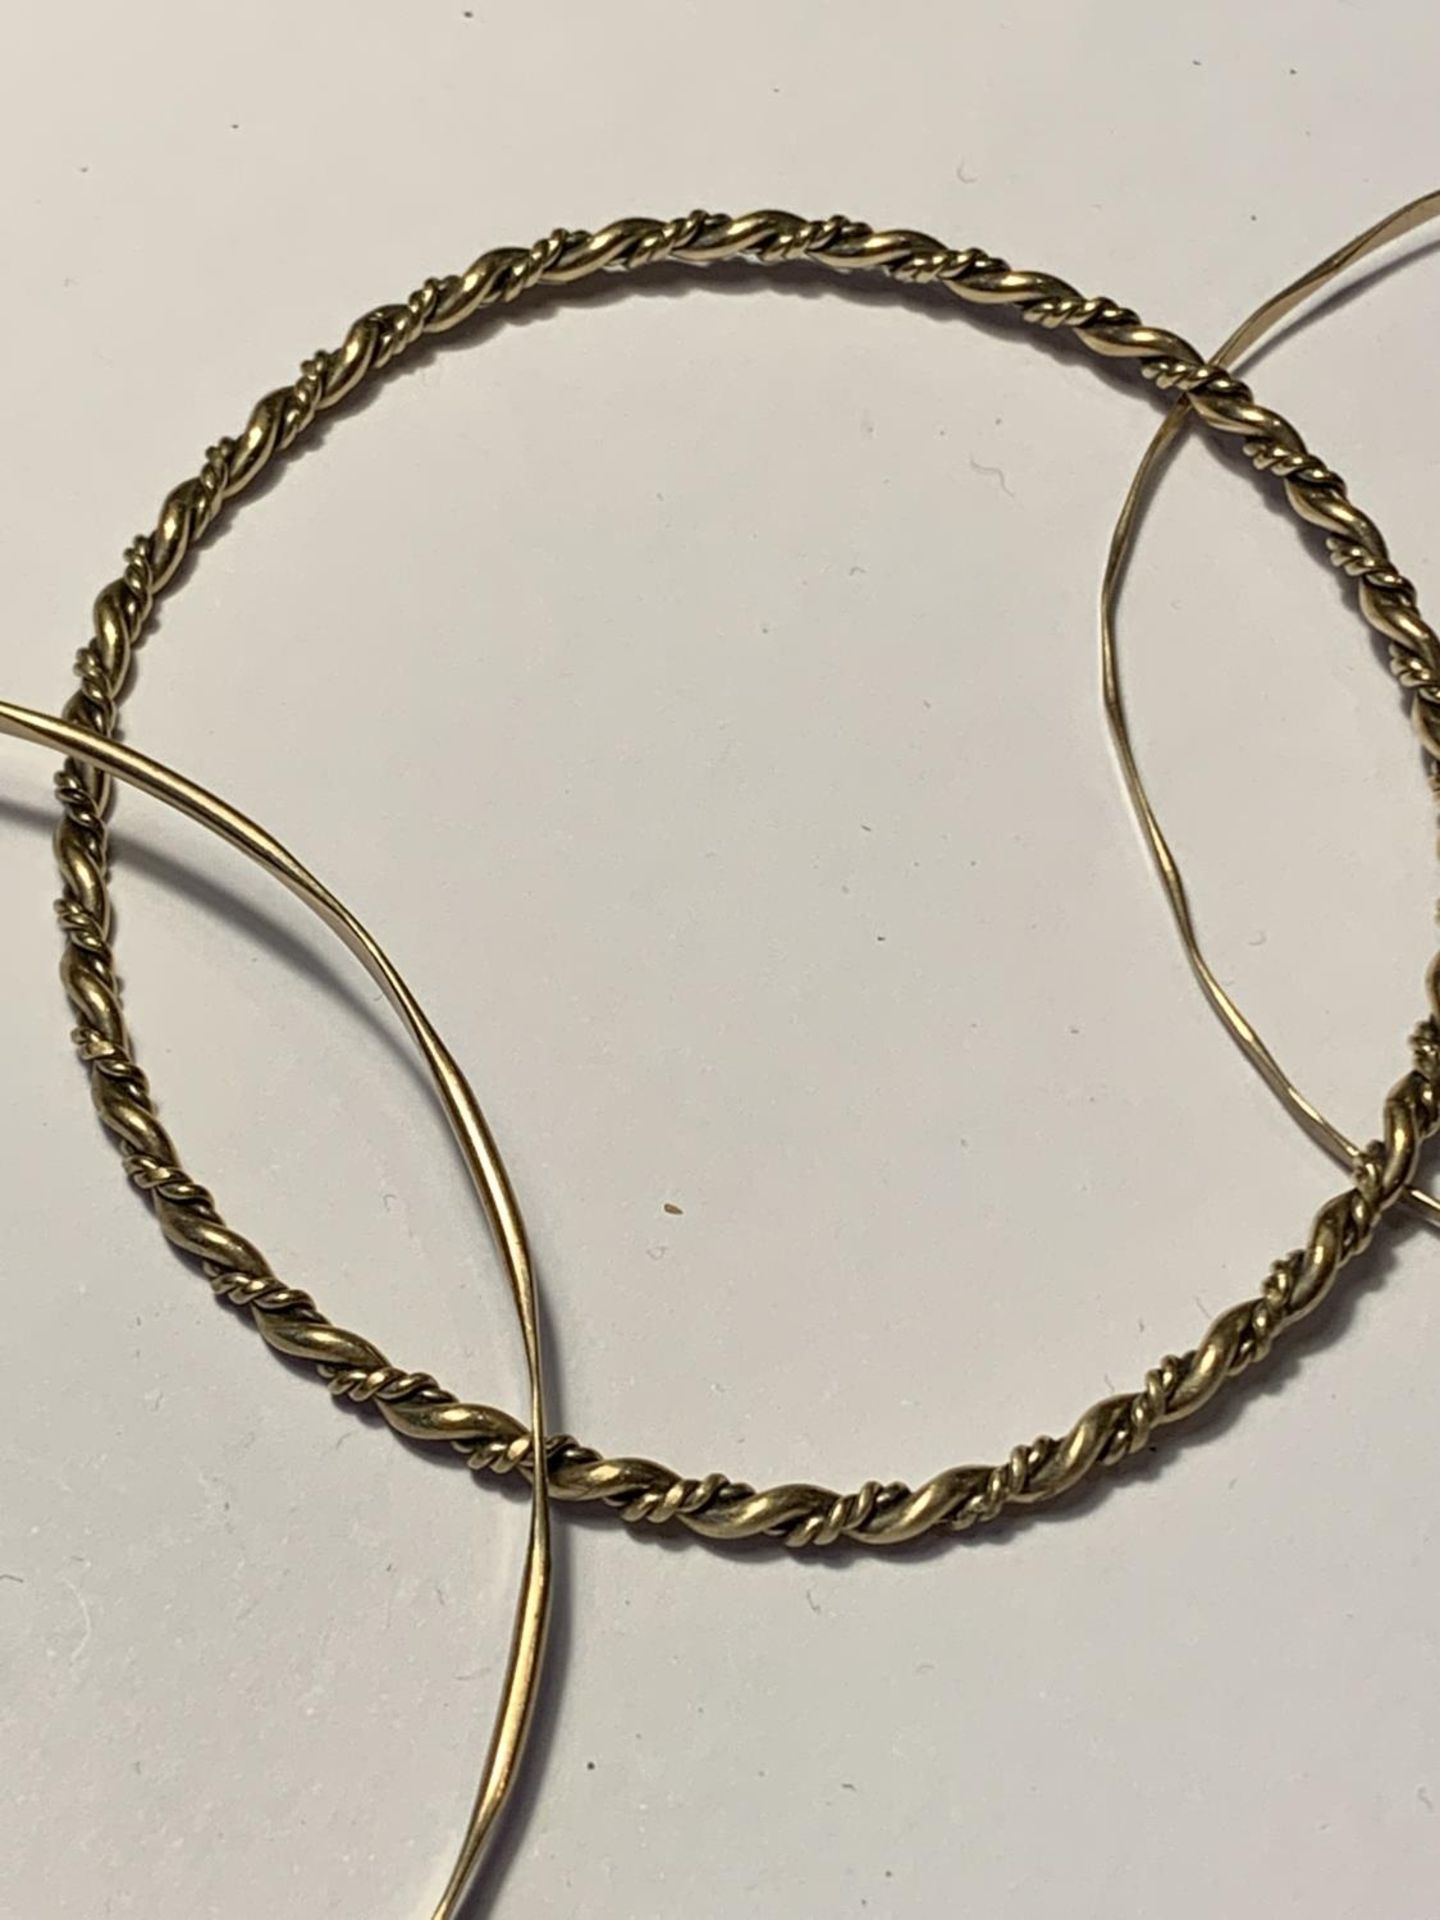 THREE TESTED TO 9 CARAT GOLD BANGLES GROSS WEIGHT 13.07 GRAMS - Image 3 of 4